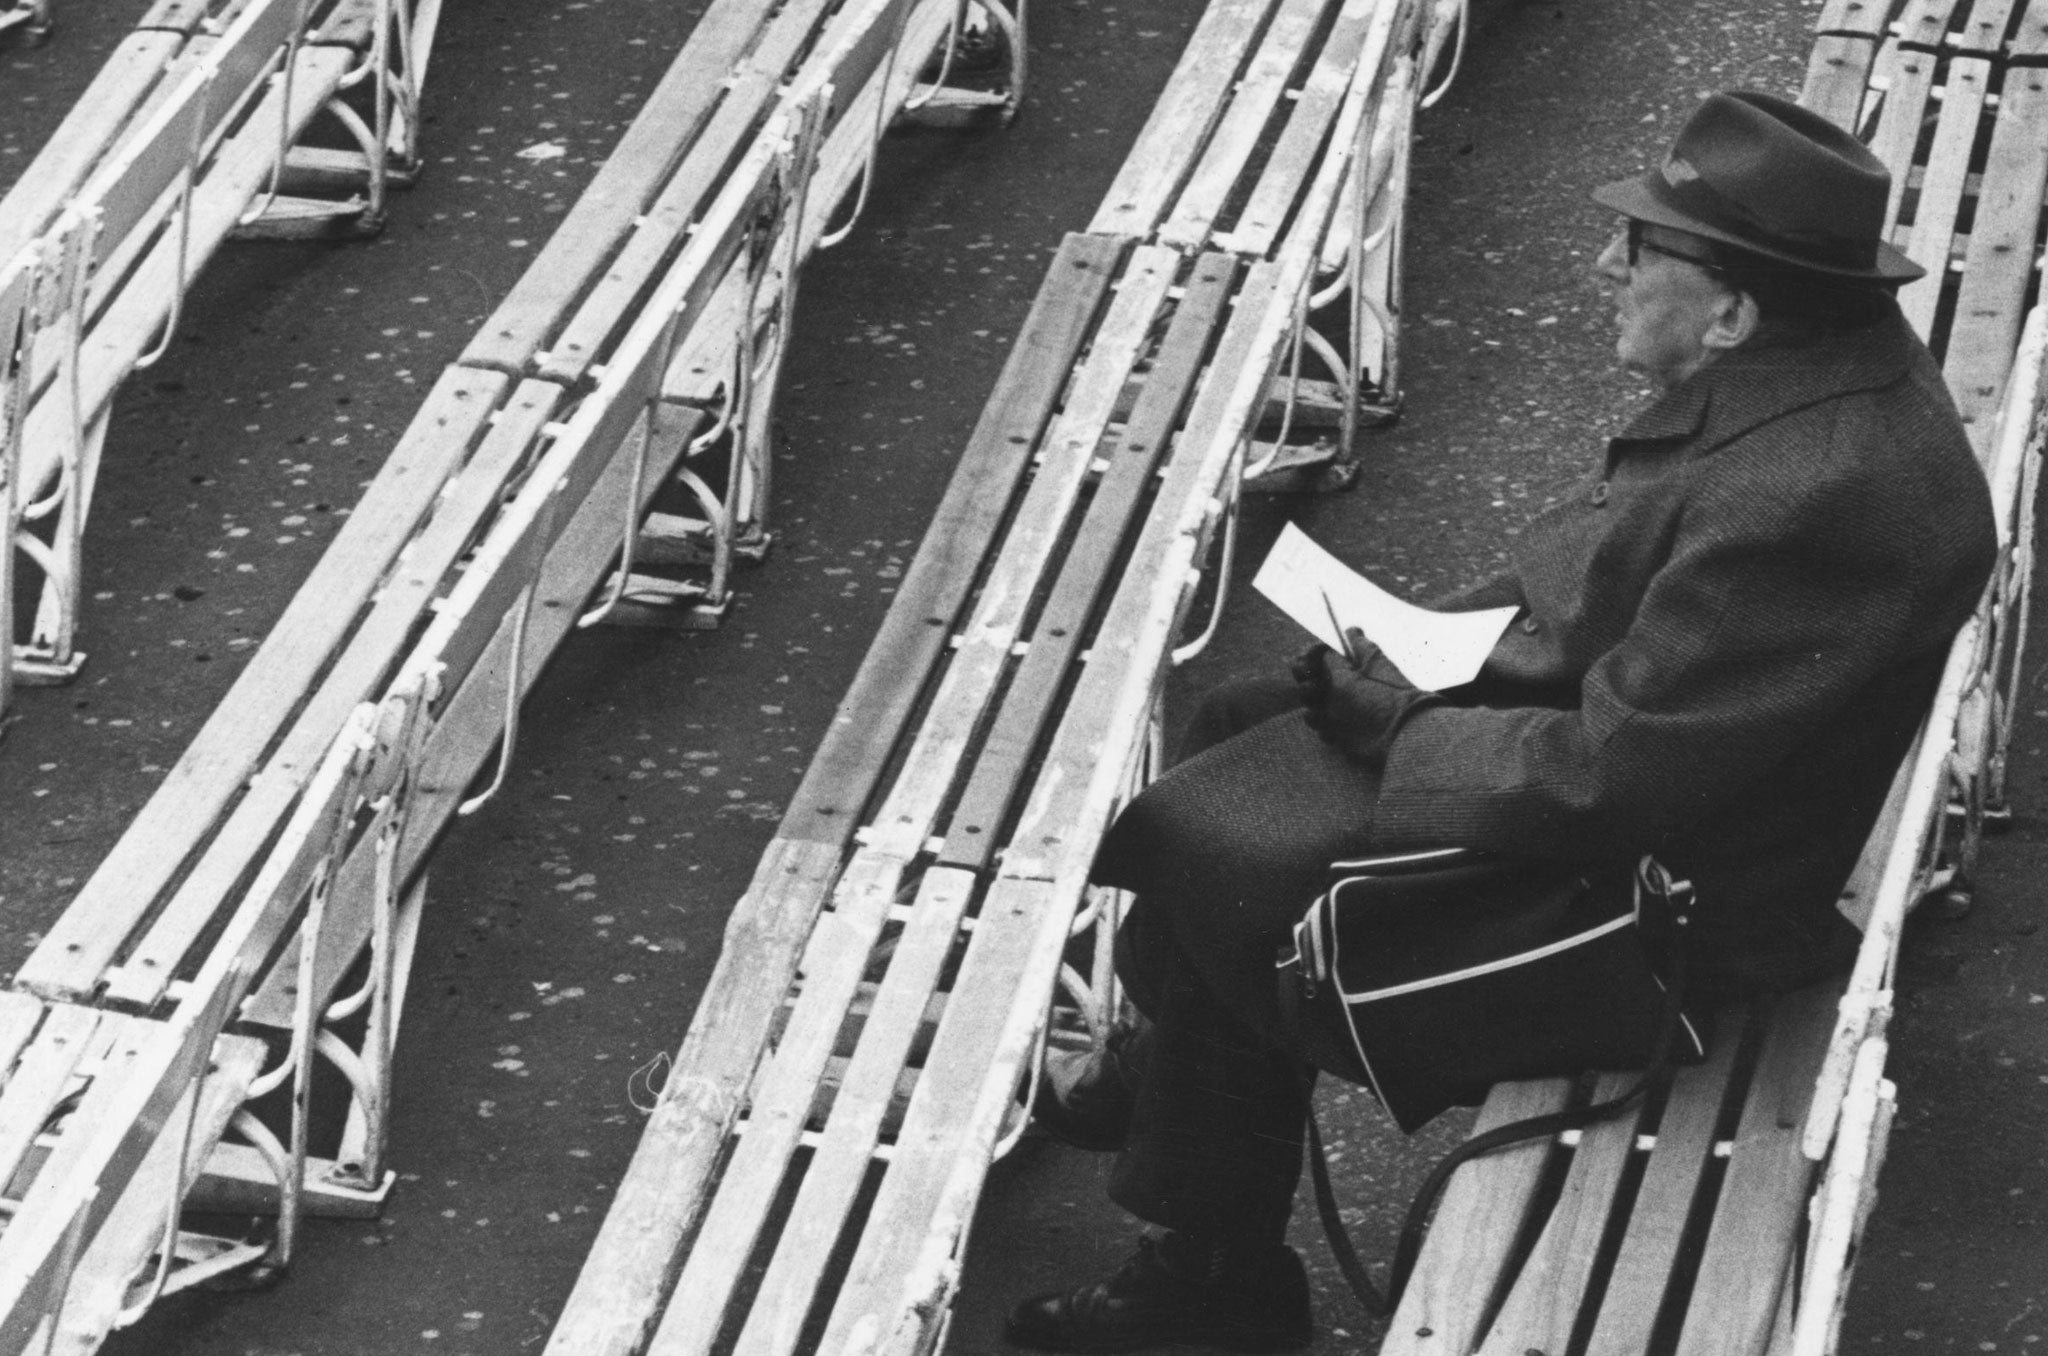 23rd April 1975: A lonely spectator watching a cricket match between MCC and Worcestershire at Lord's, London.